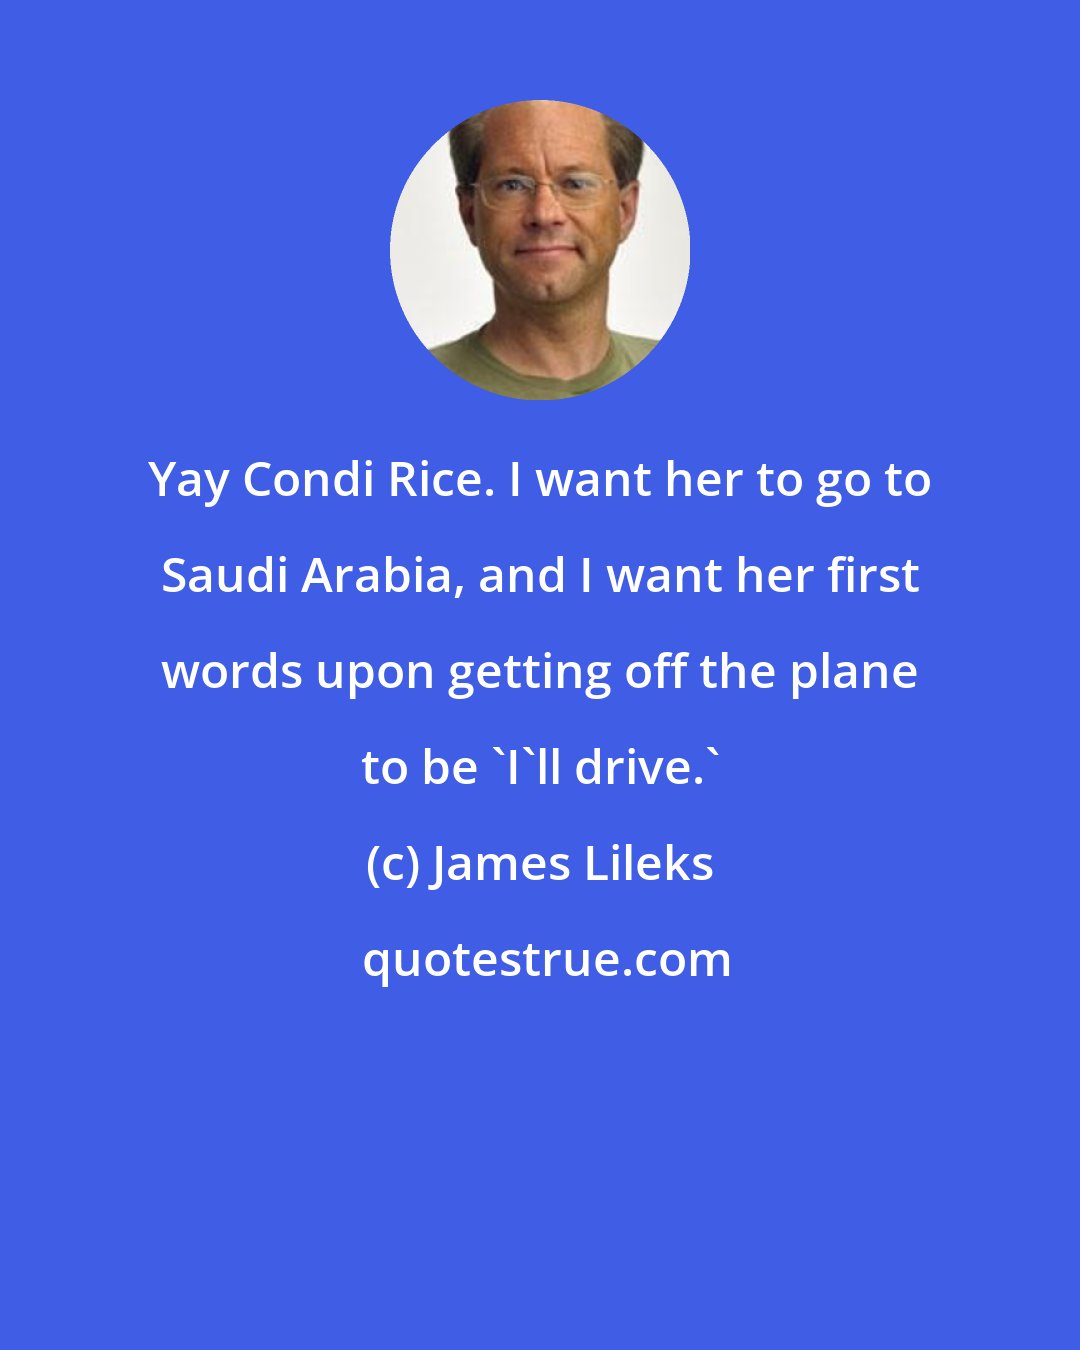 James Lileks: Yay Condi Rice. I want her to go to Saudi Arabia, and I want her first words upon getting off the plane to be 'I'll drive.'